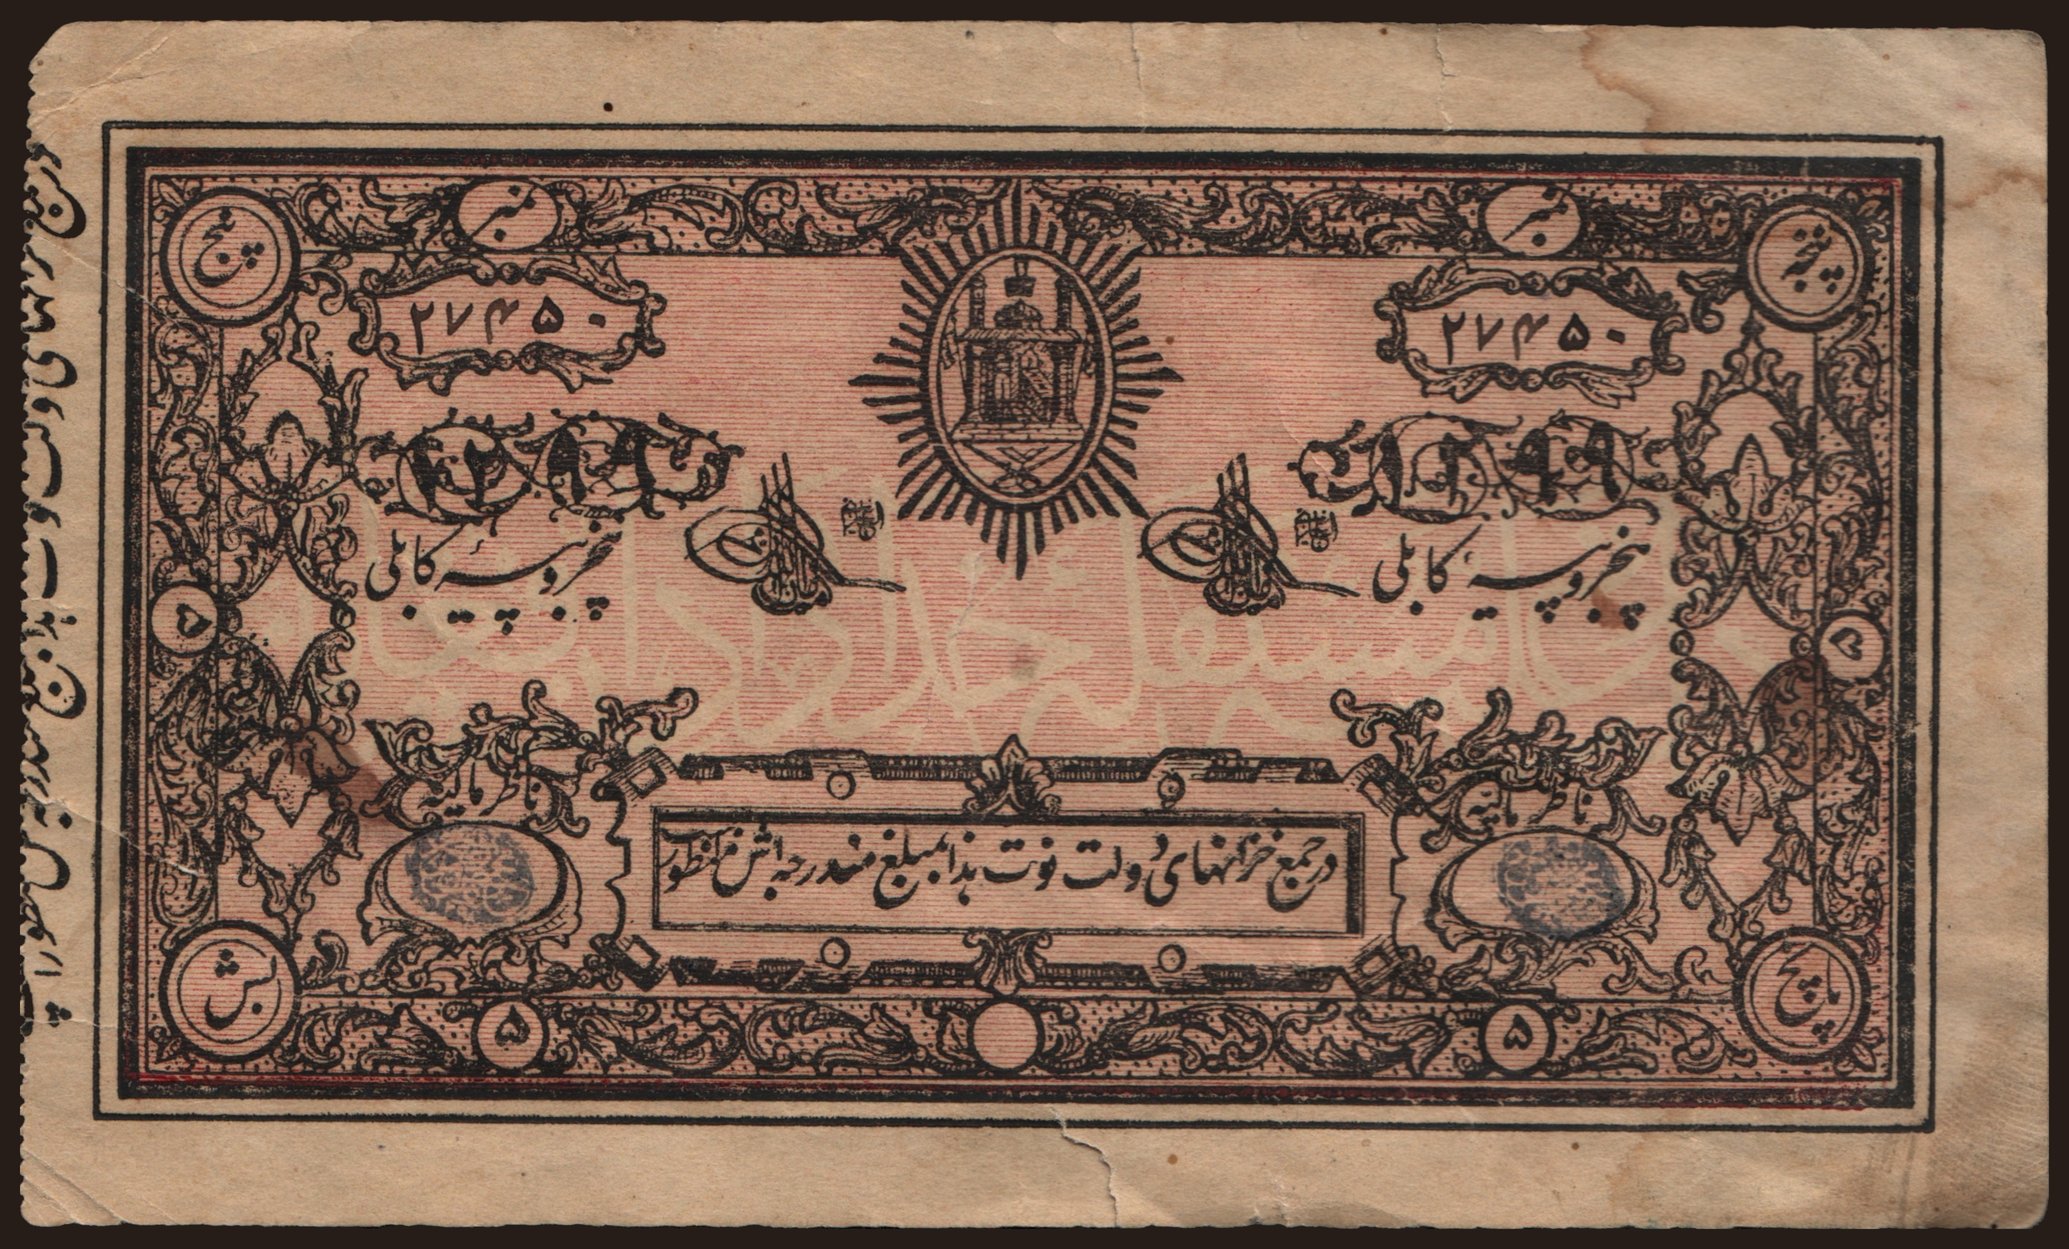 5 rupees, 1920